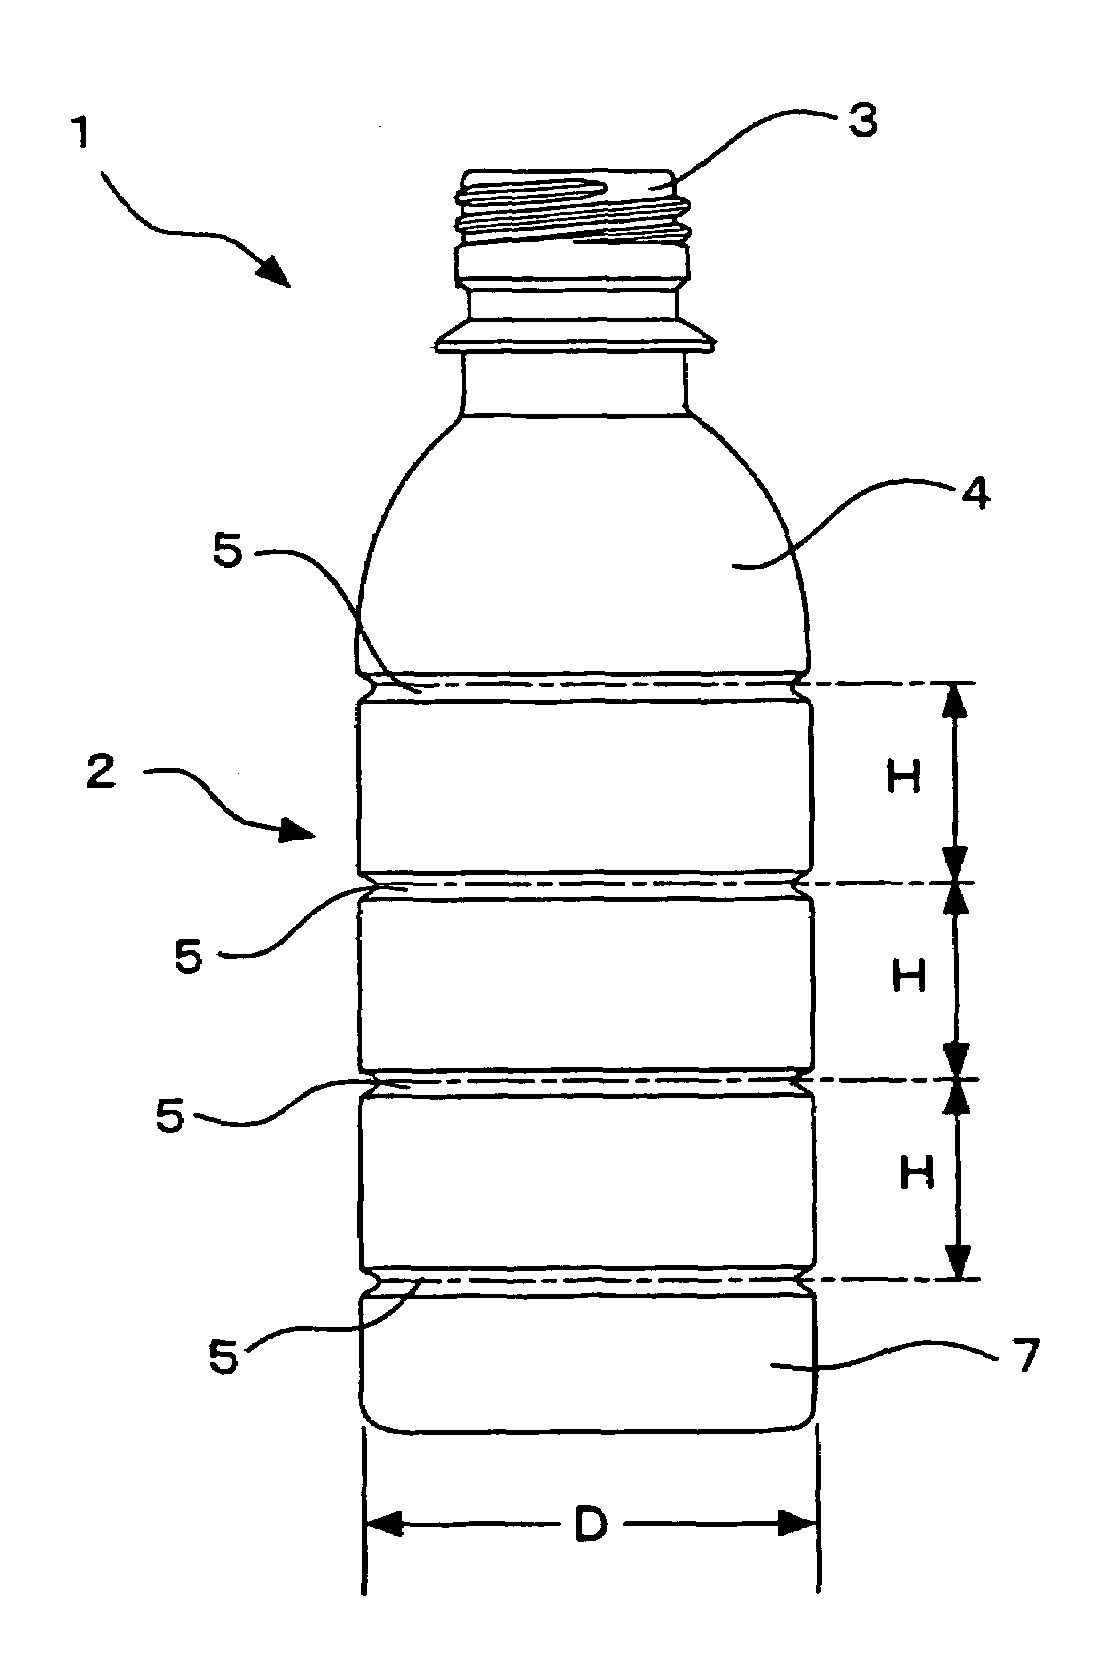 Synthetic resin bottle with circumferential ribs for increased surface rigidity